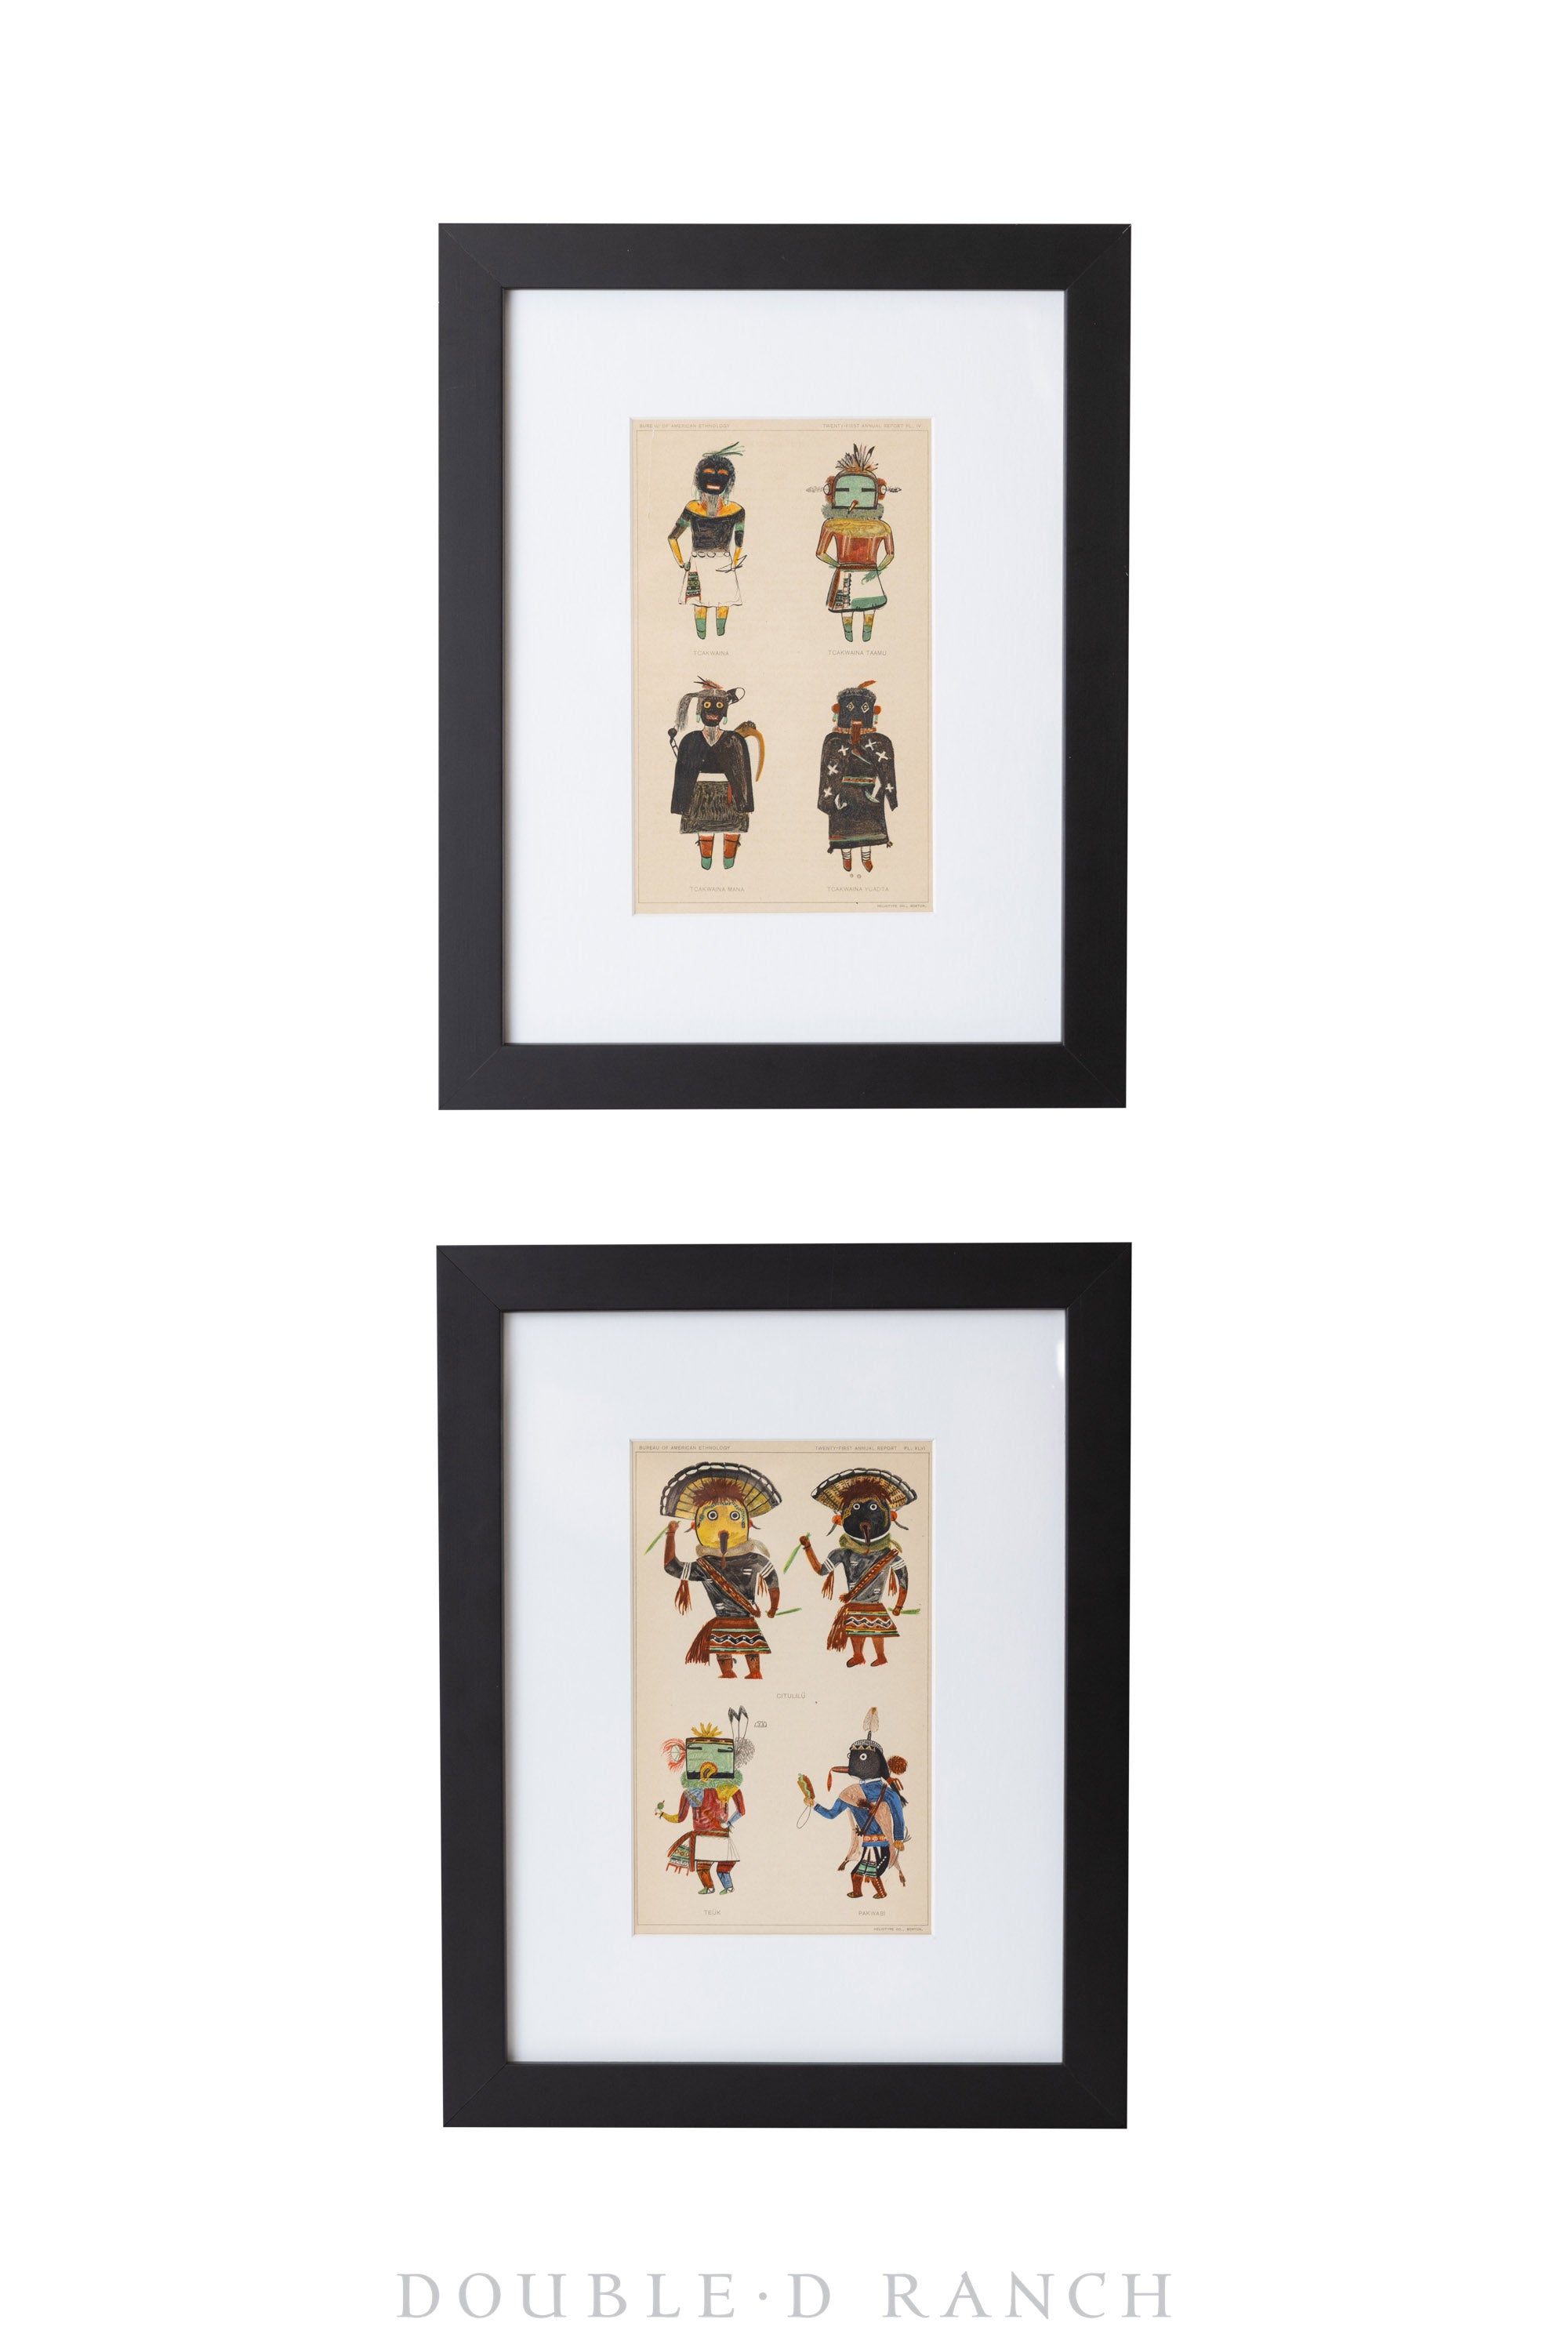 Art, Hand Colored Prints, Pair, Bureau of Ethnology, 21st Annual Report, Vintage, 1242